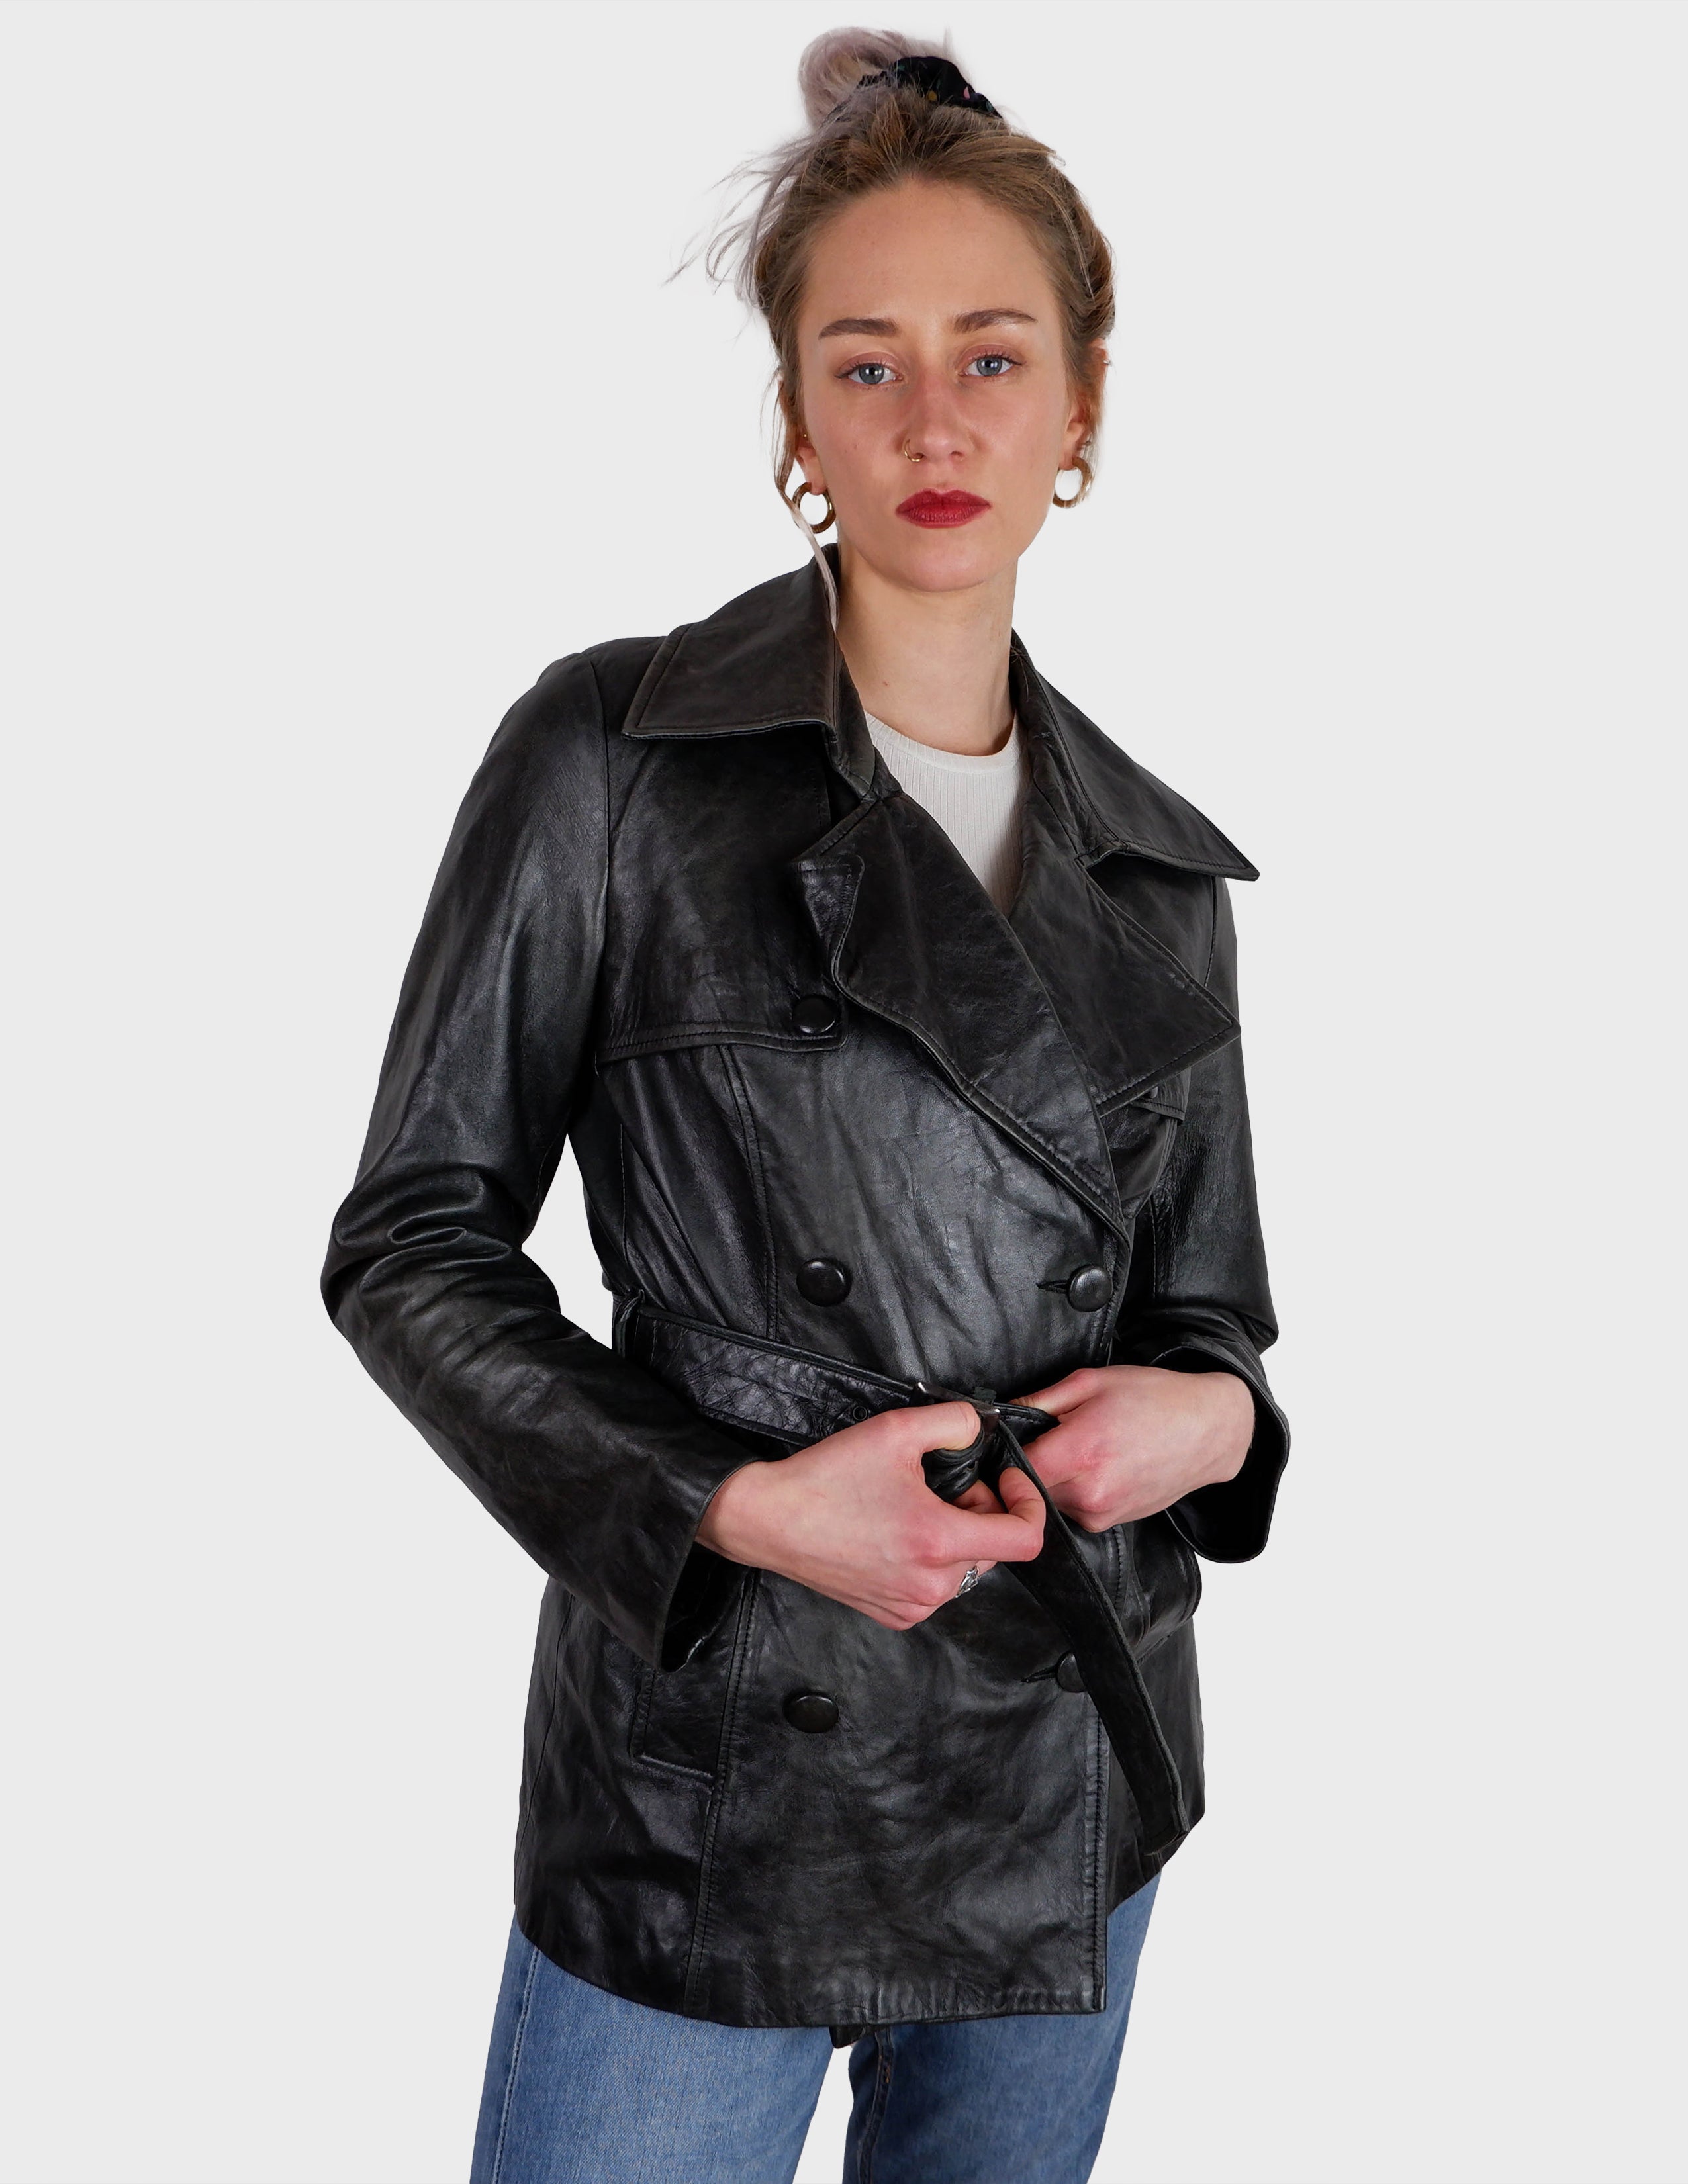 Dior Women's 80s Edgy Vintage Cropped Leather Jacket